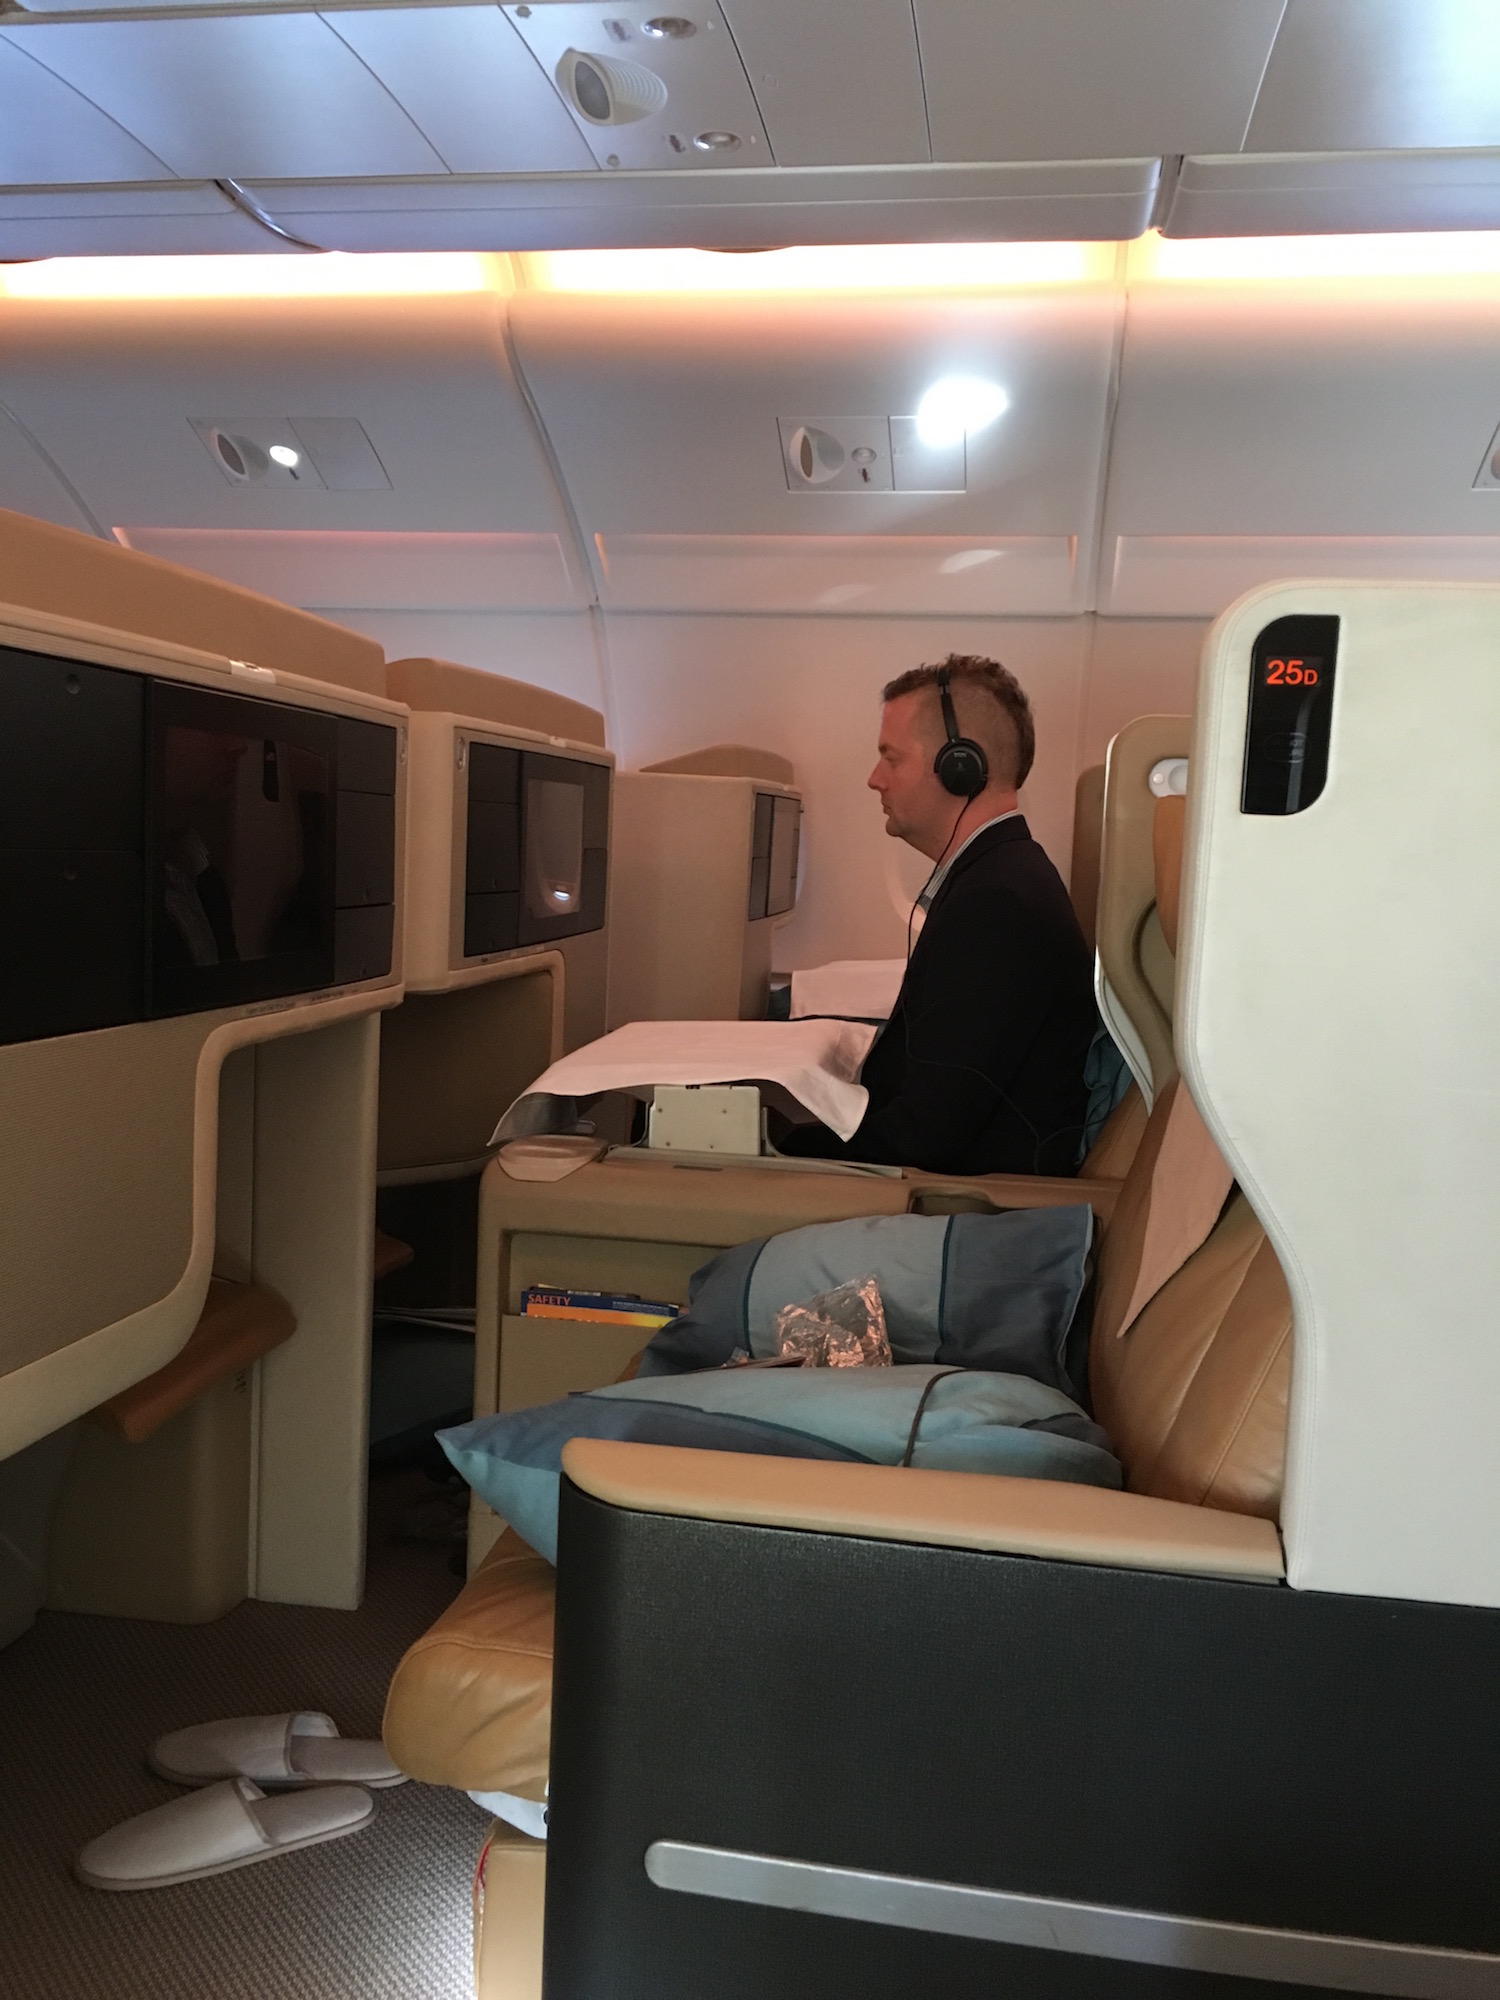 Japan Trip: Singapore Airlines SQ11 in Business Class - malrase dot com